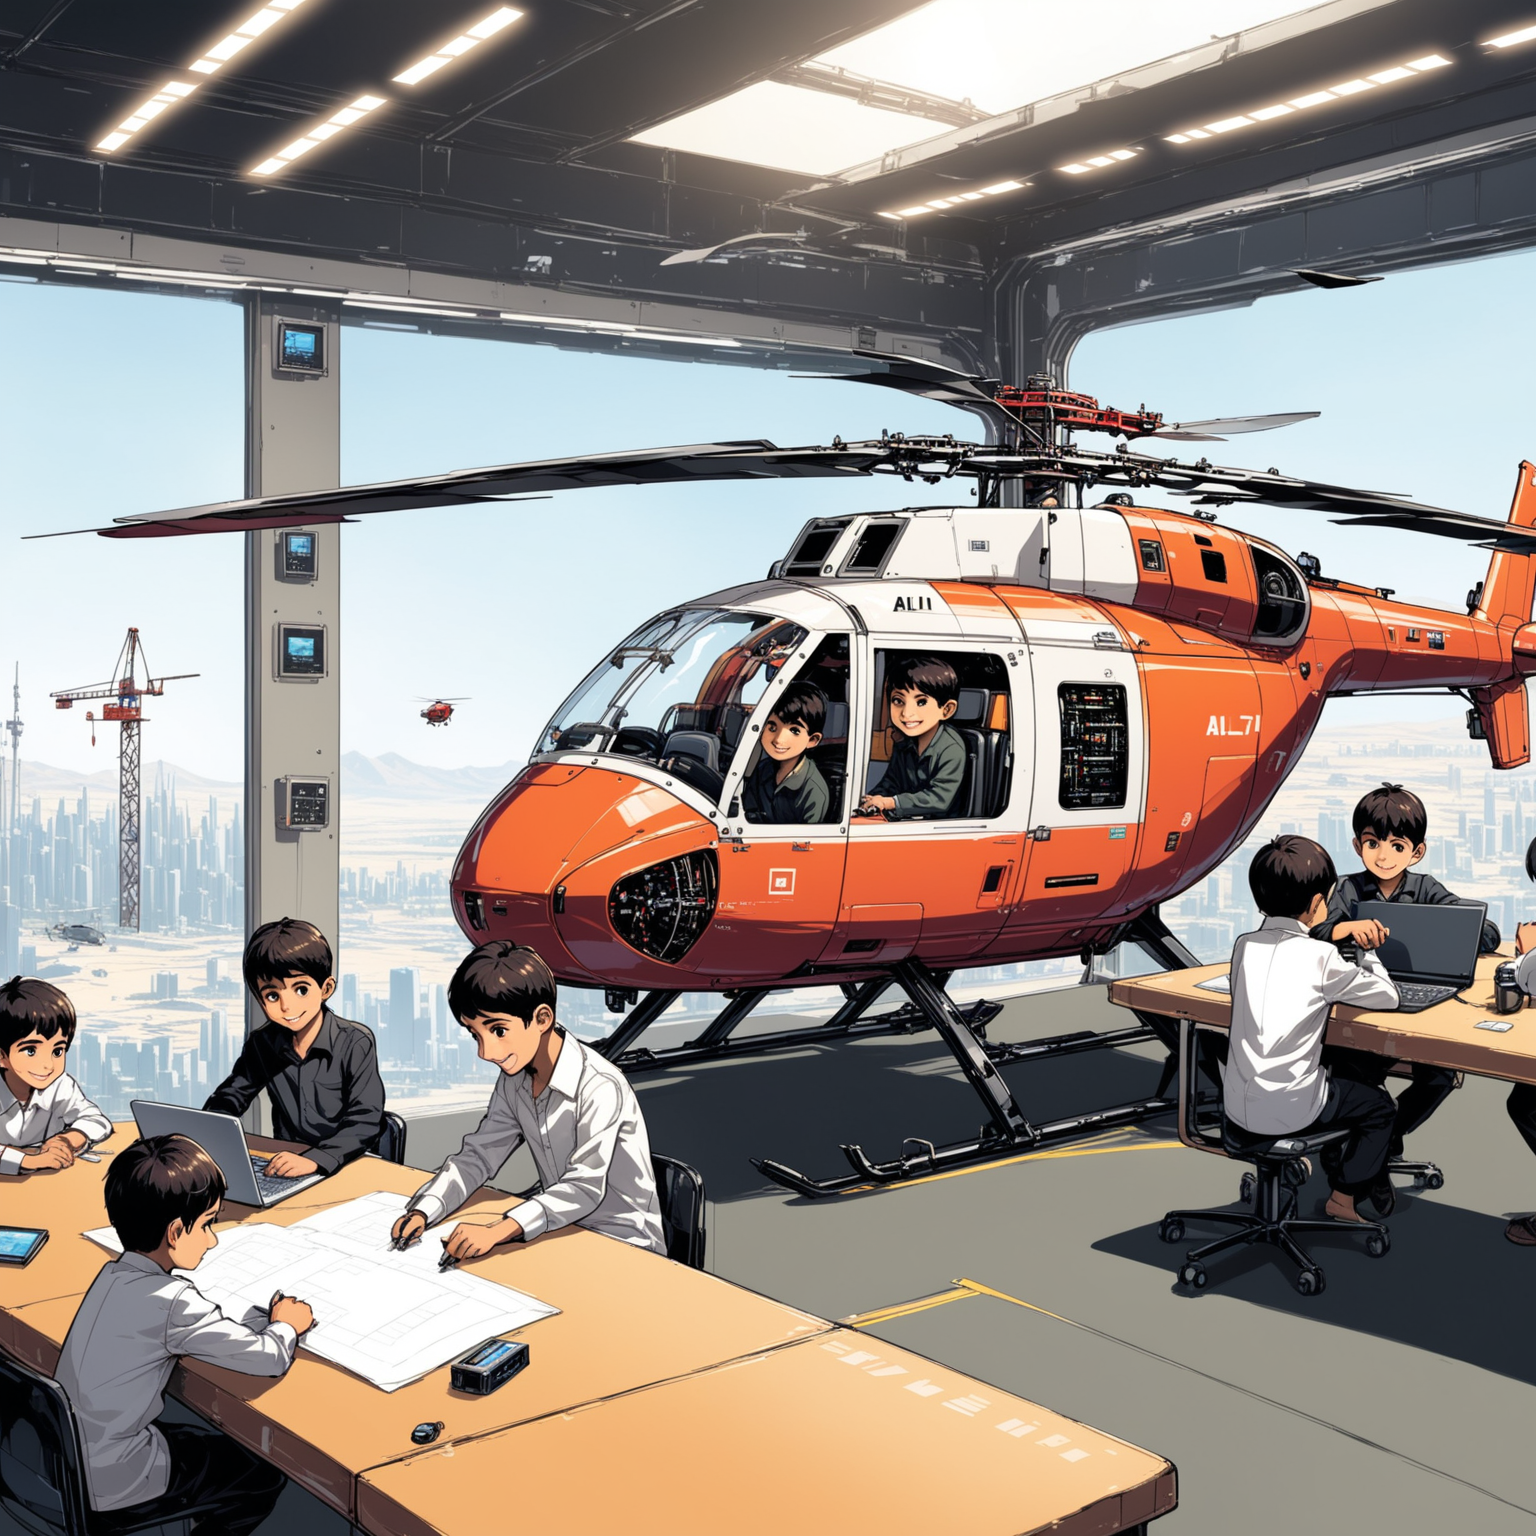 Persian Boys Designing and Building Helicopters in HighTech Workshop